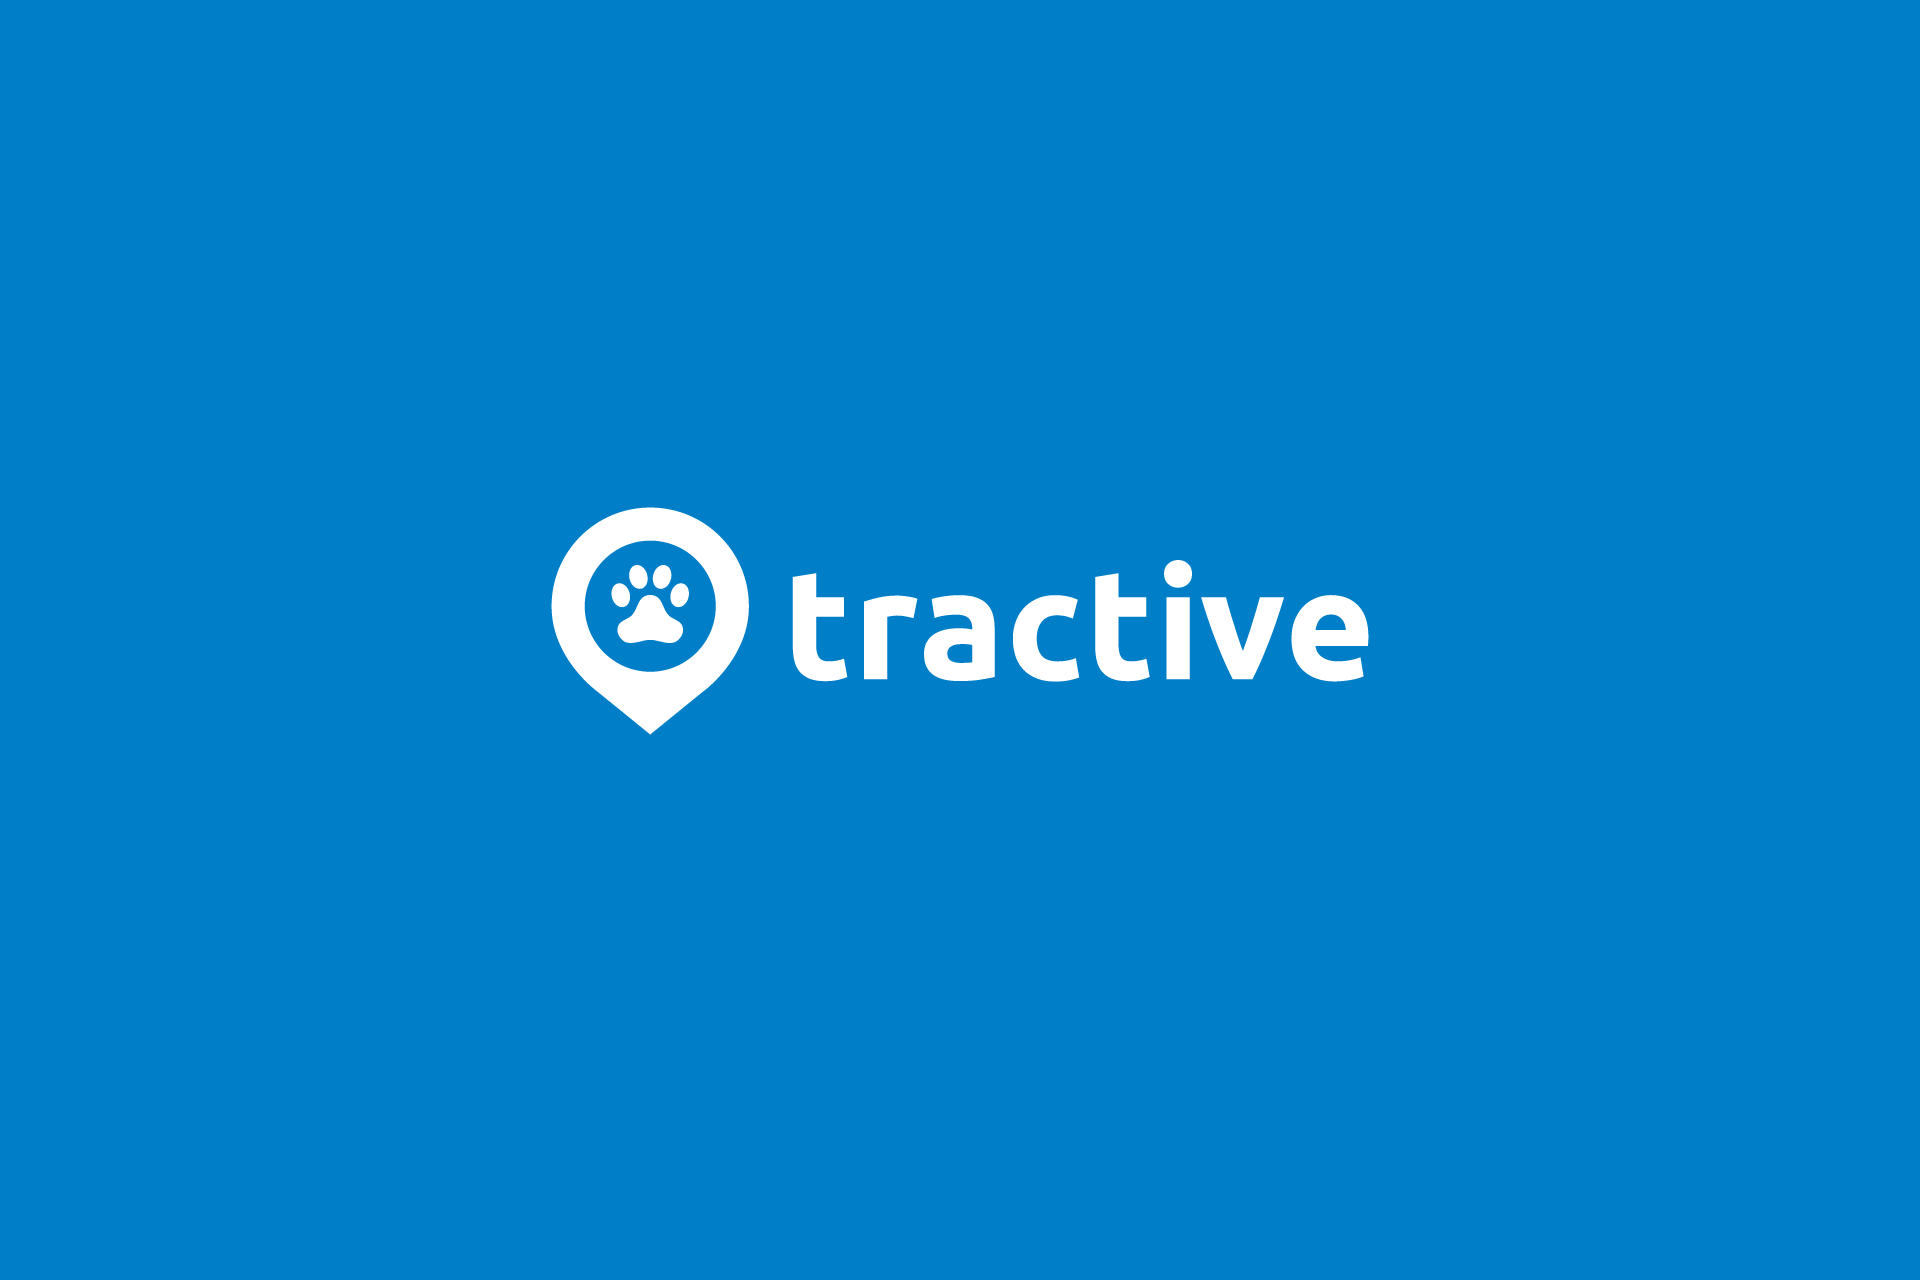 tractive logo on blue background